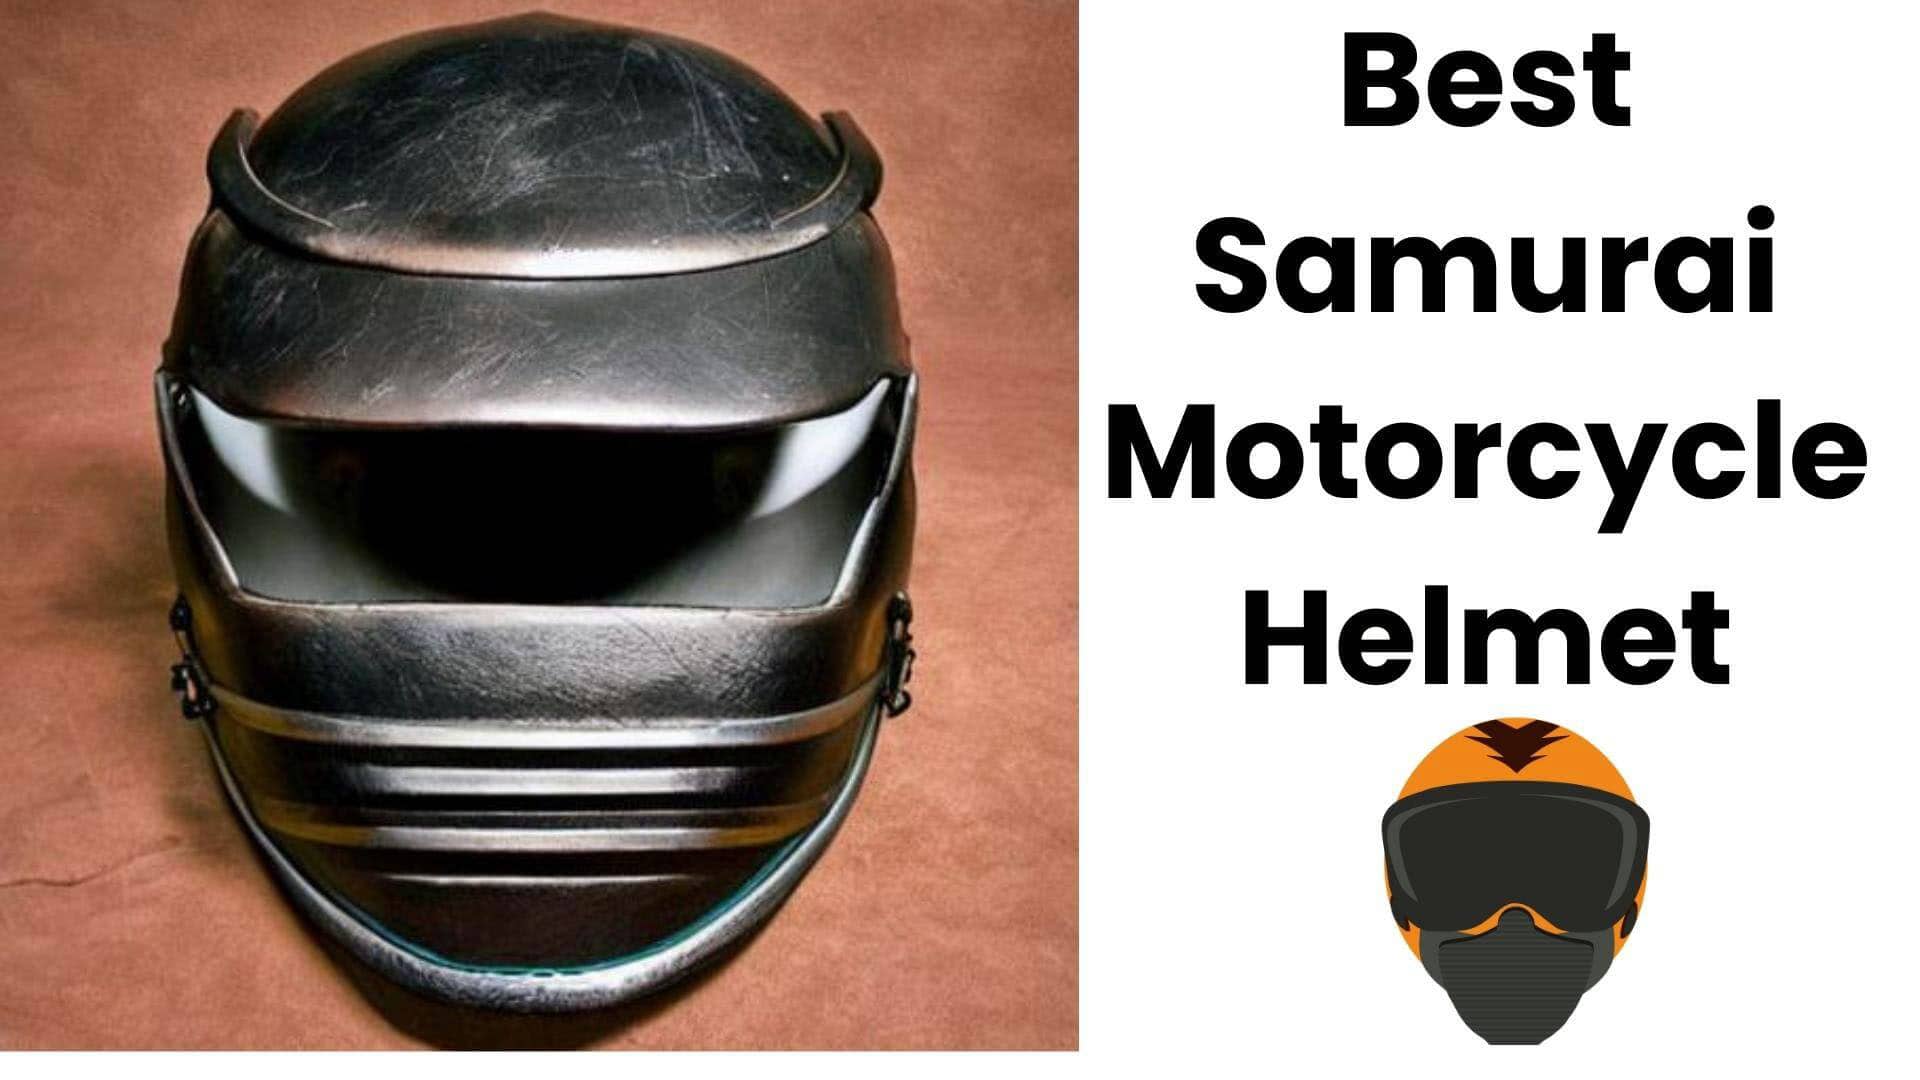 The Best Samurai Motorcycle Helmets For Those Looking To Ride With Style!